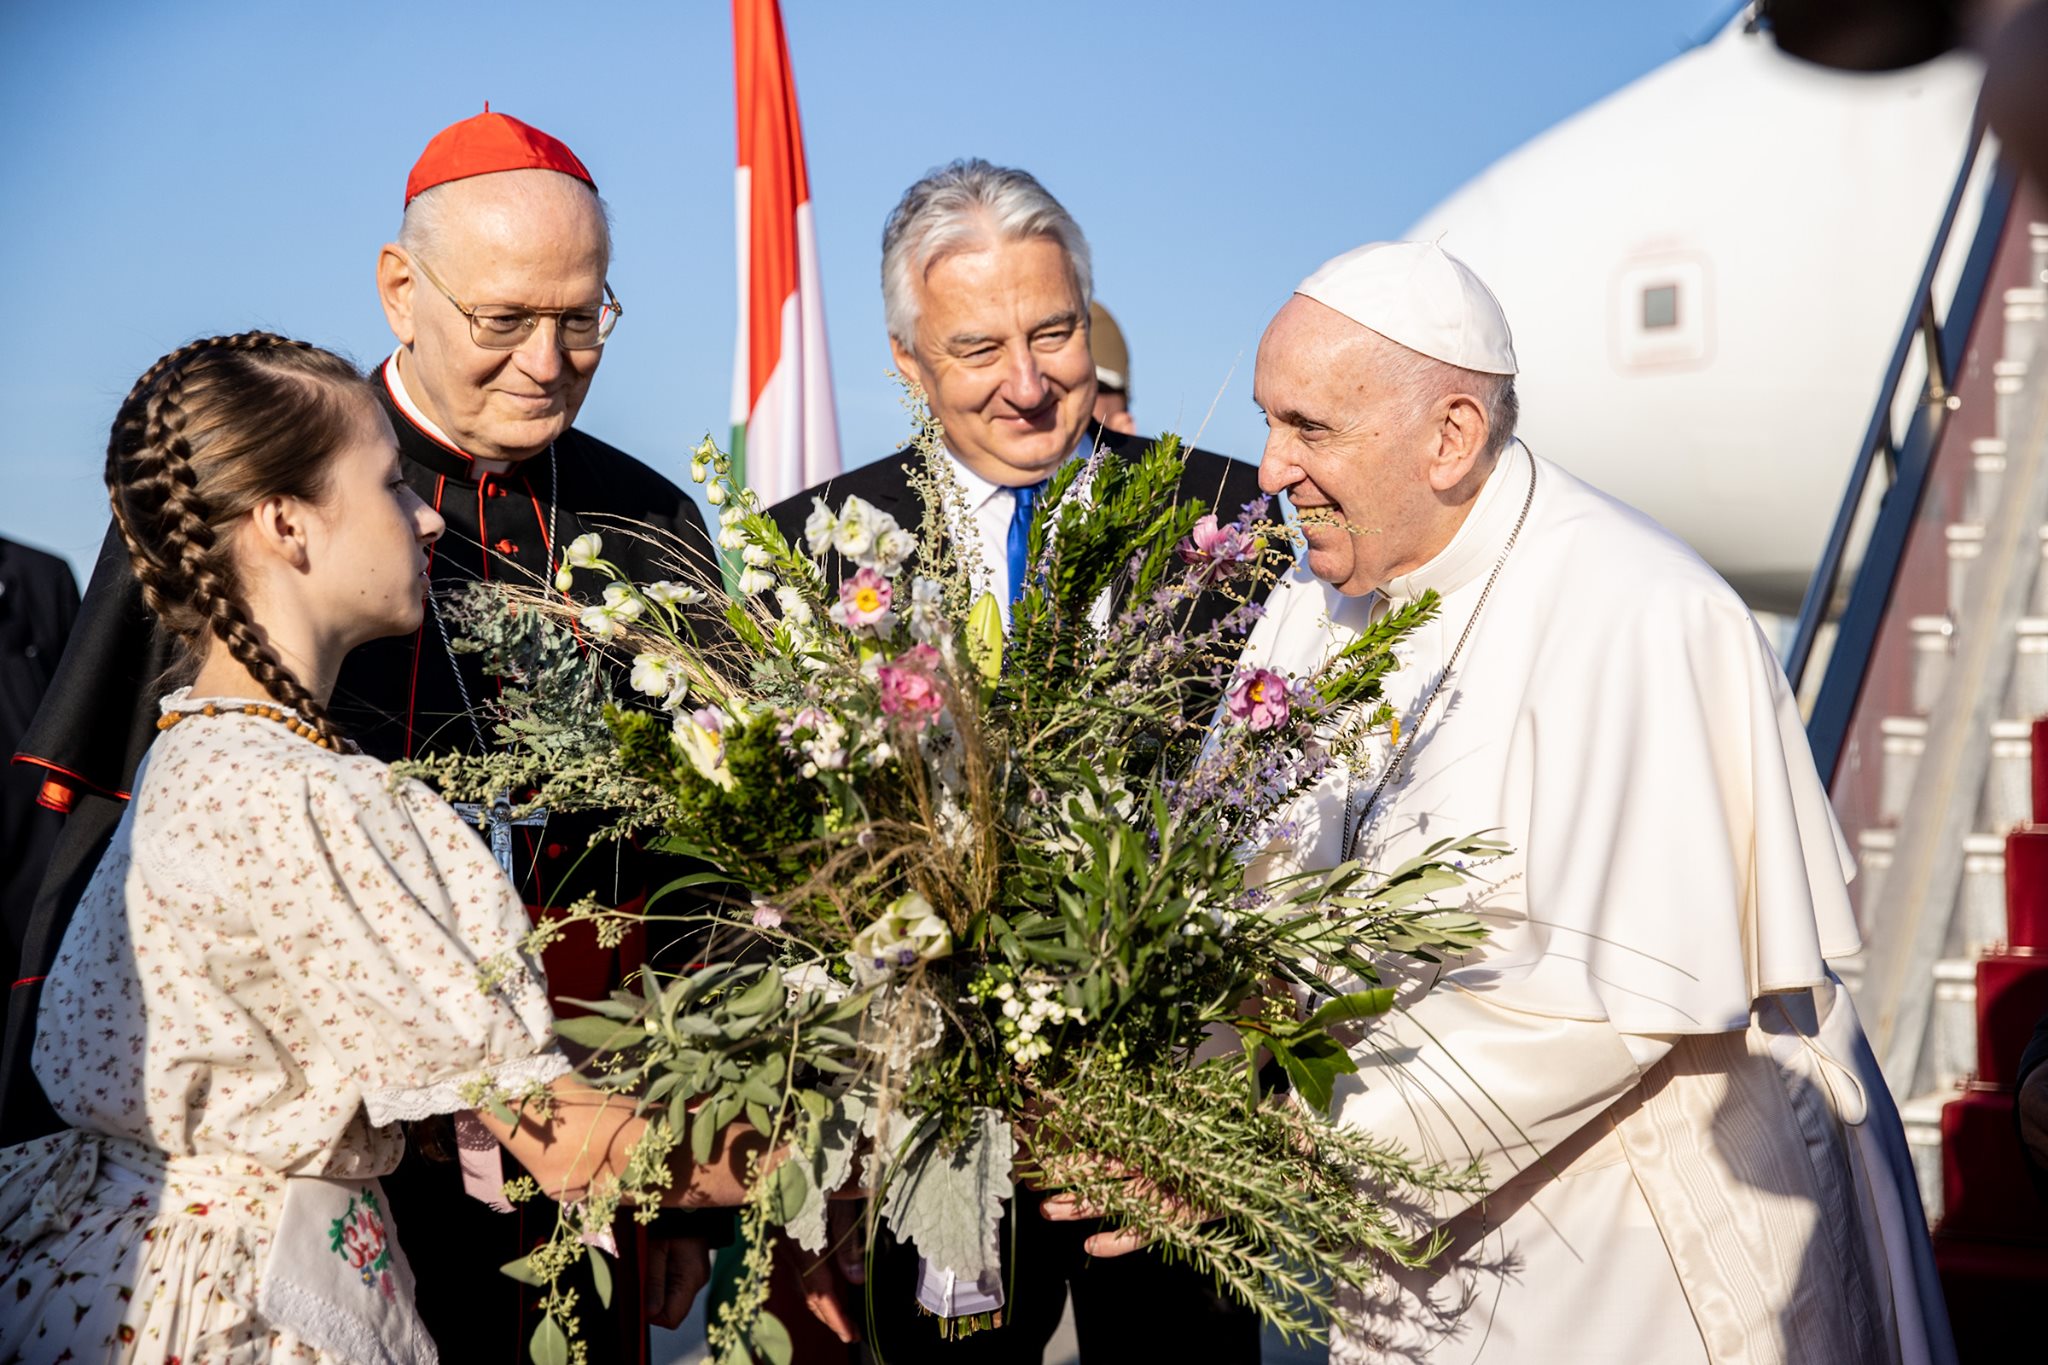 pope visit to budapest